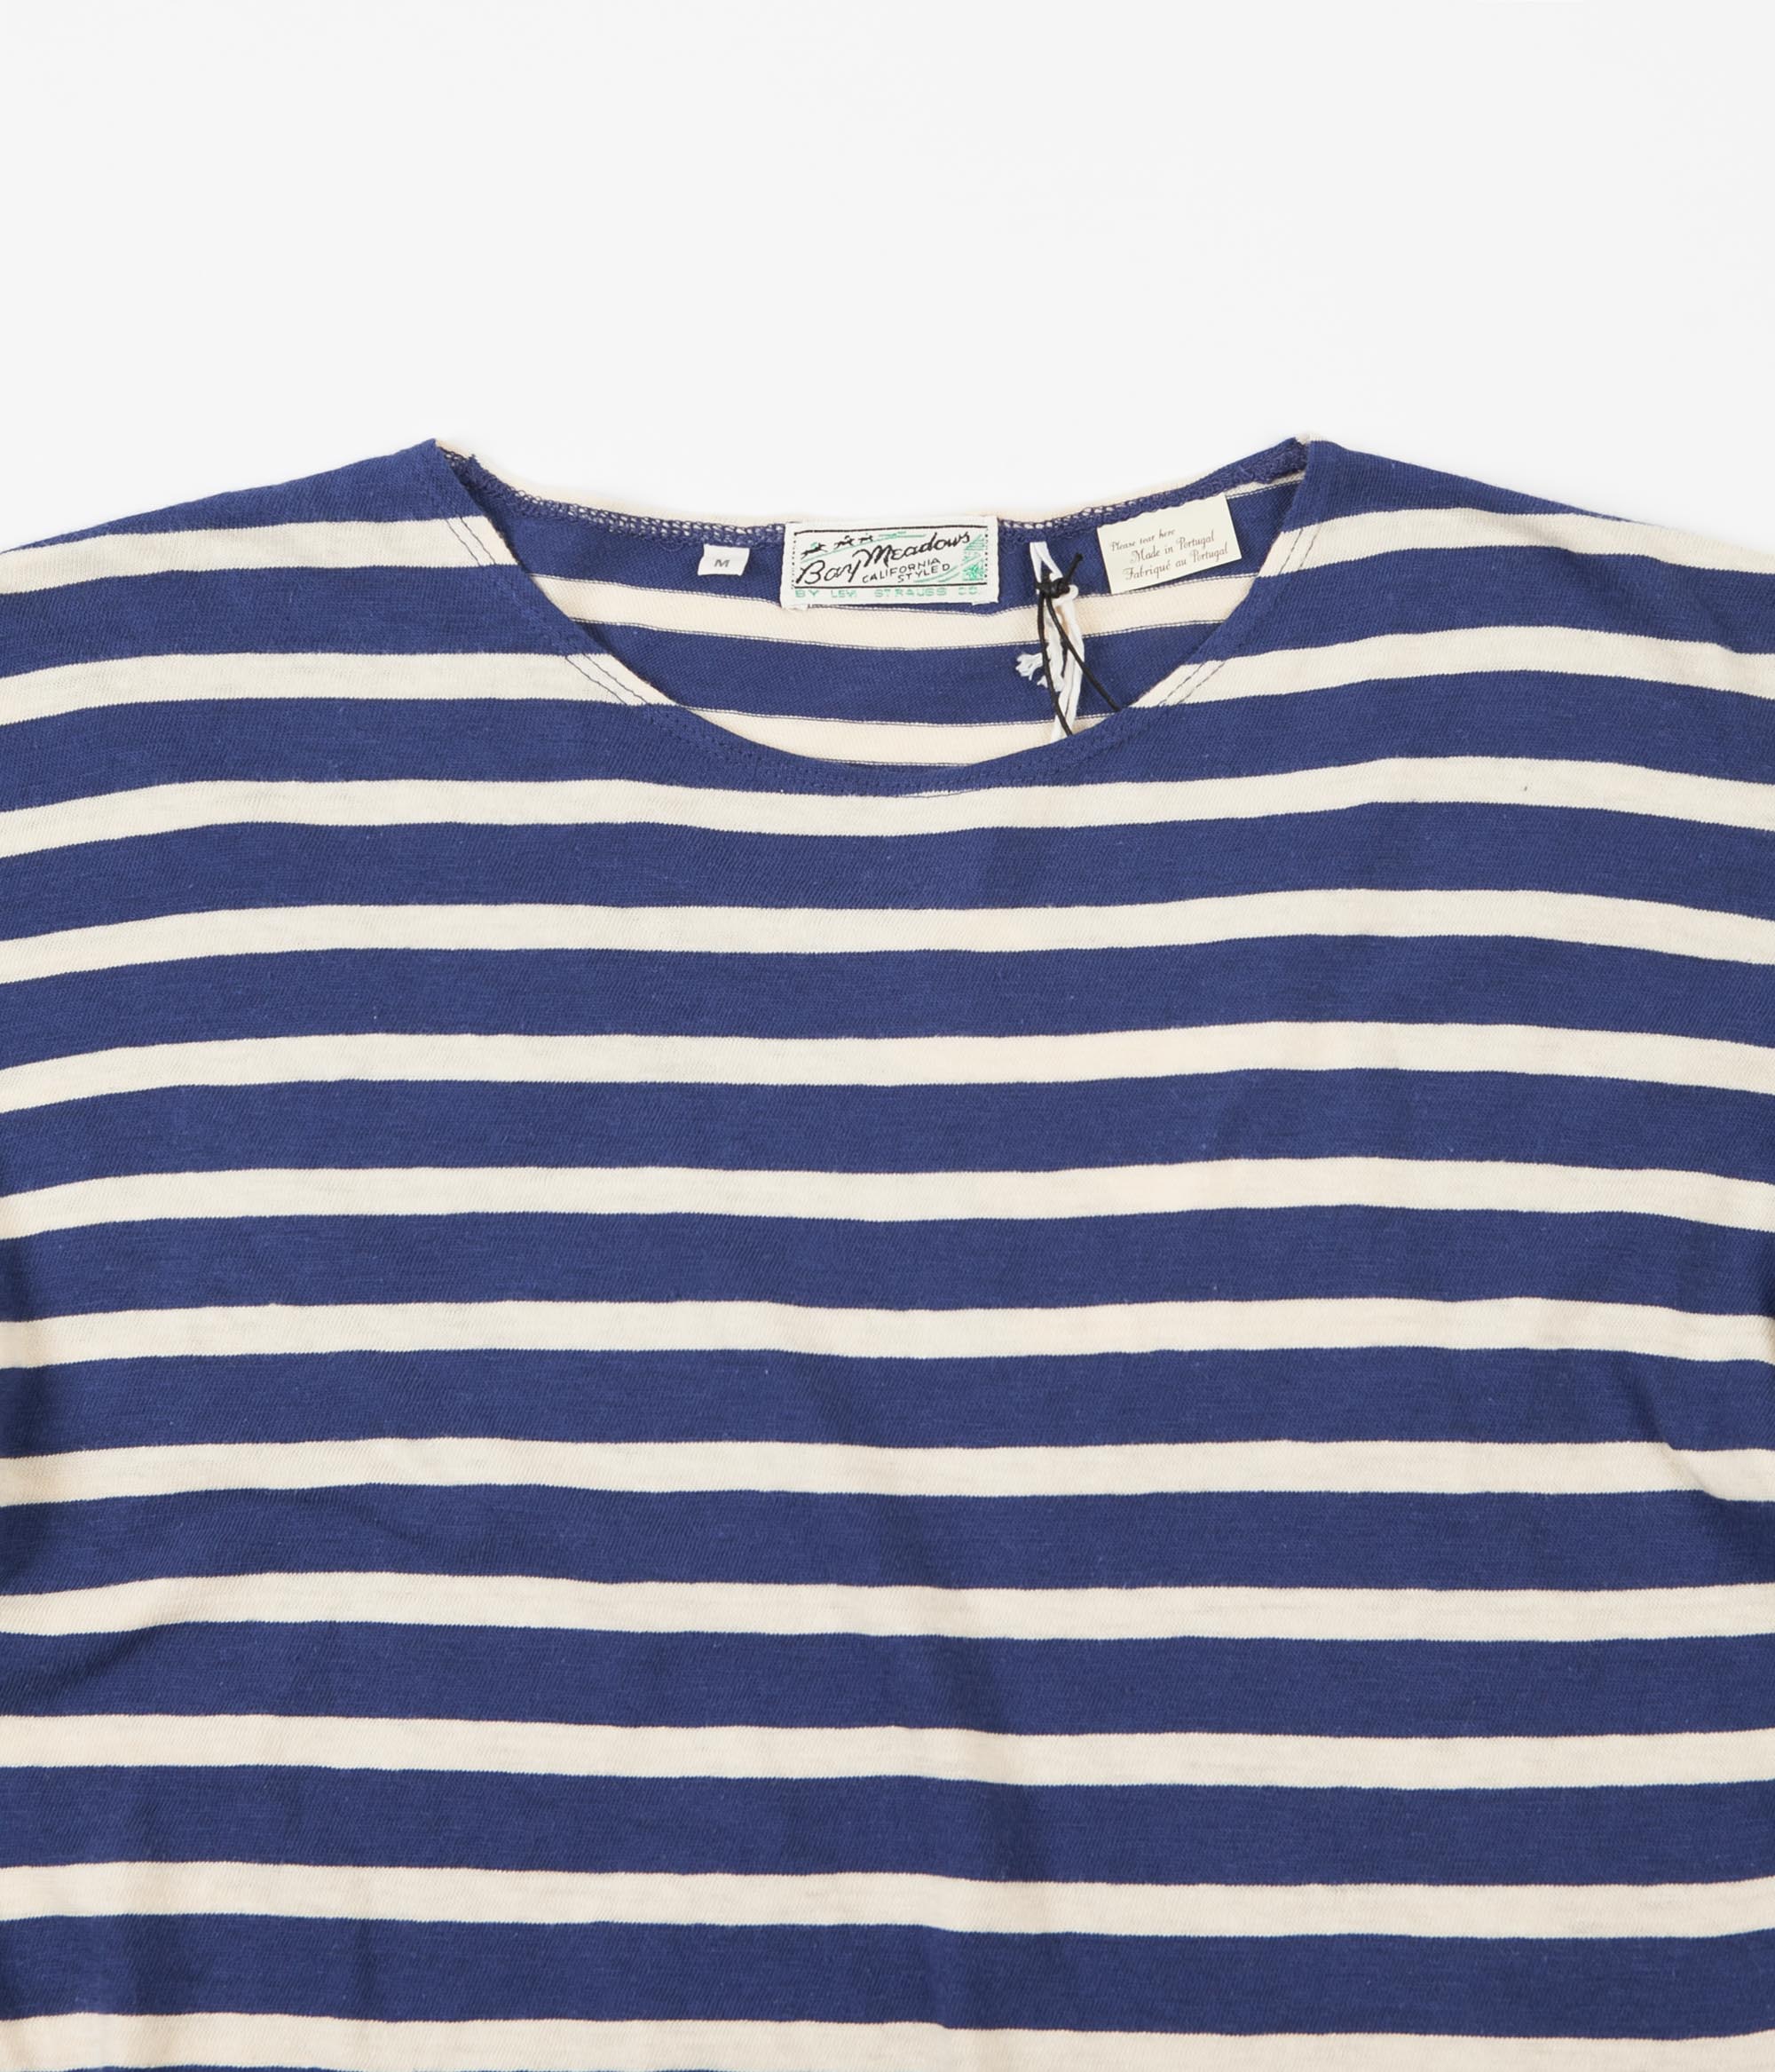 levis blue and white striped shirt